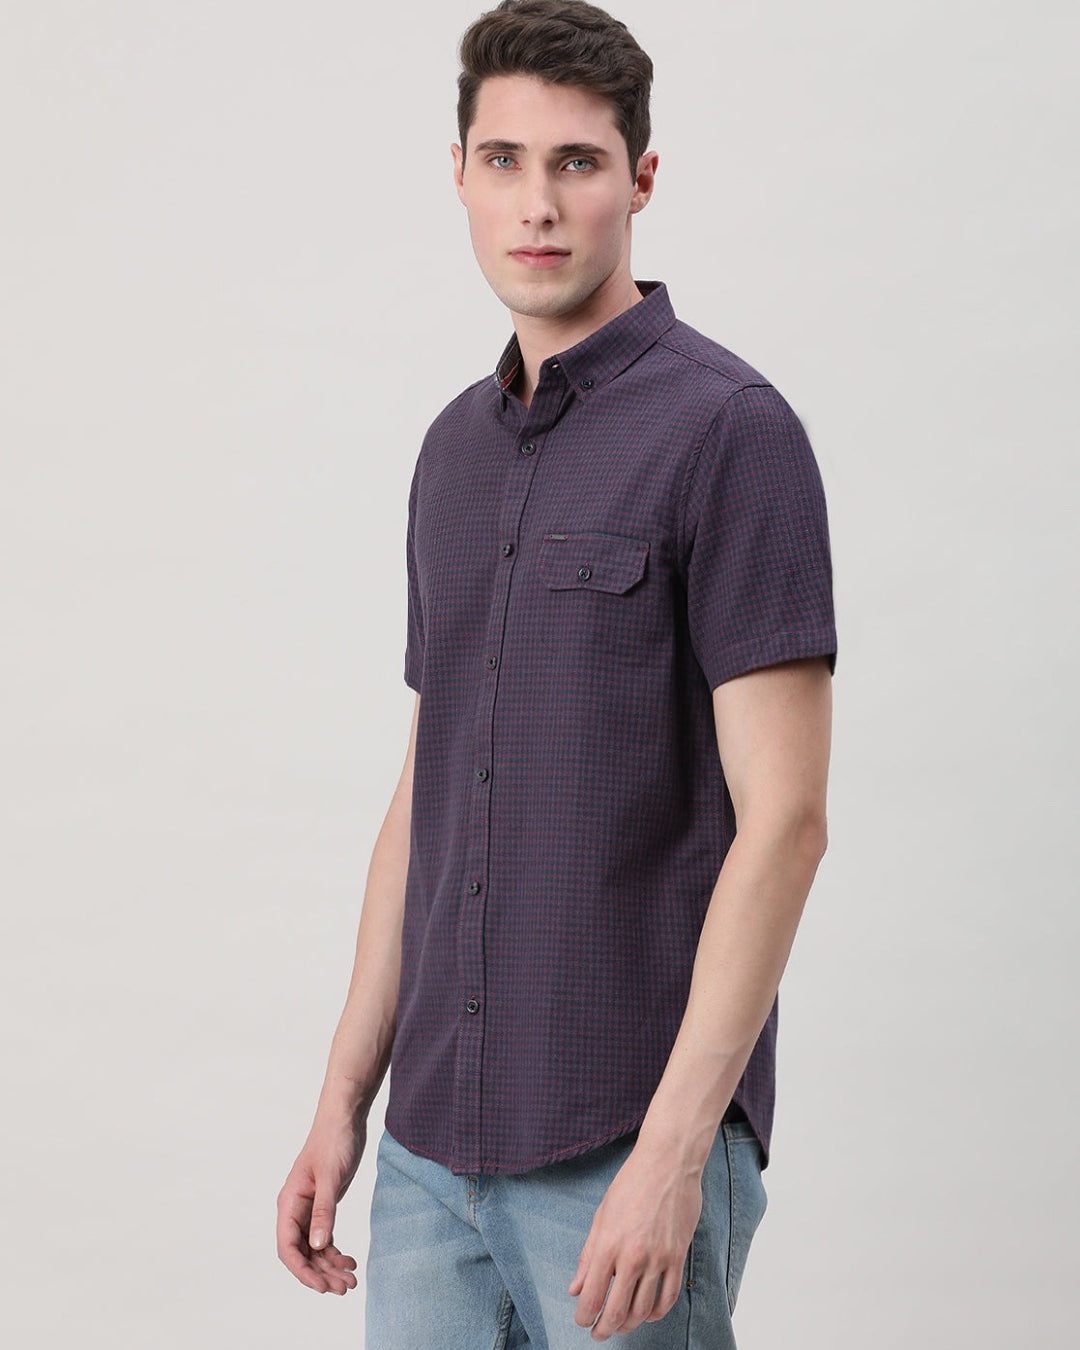 Casual Wine Half Sleeve Comfort Fit Check Shirt with Collar for Men